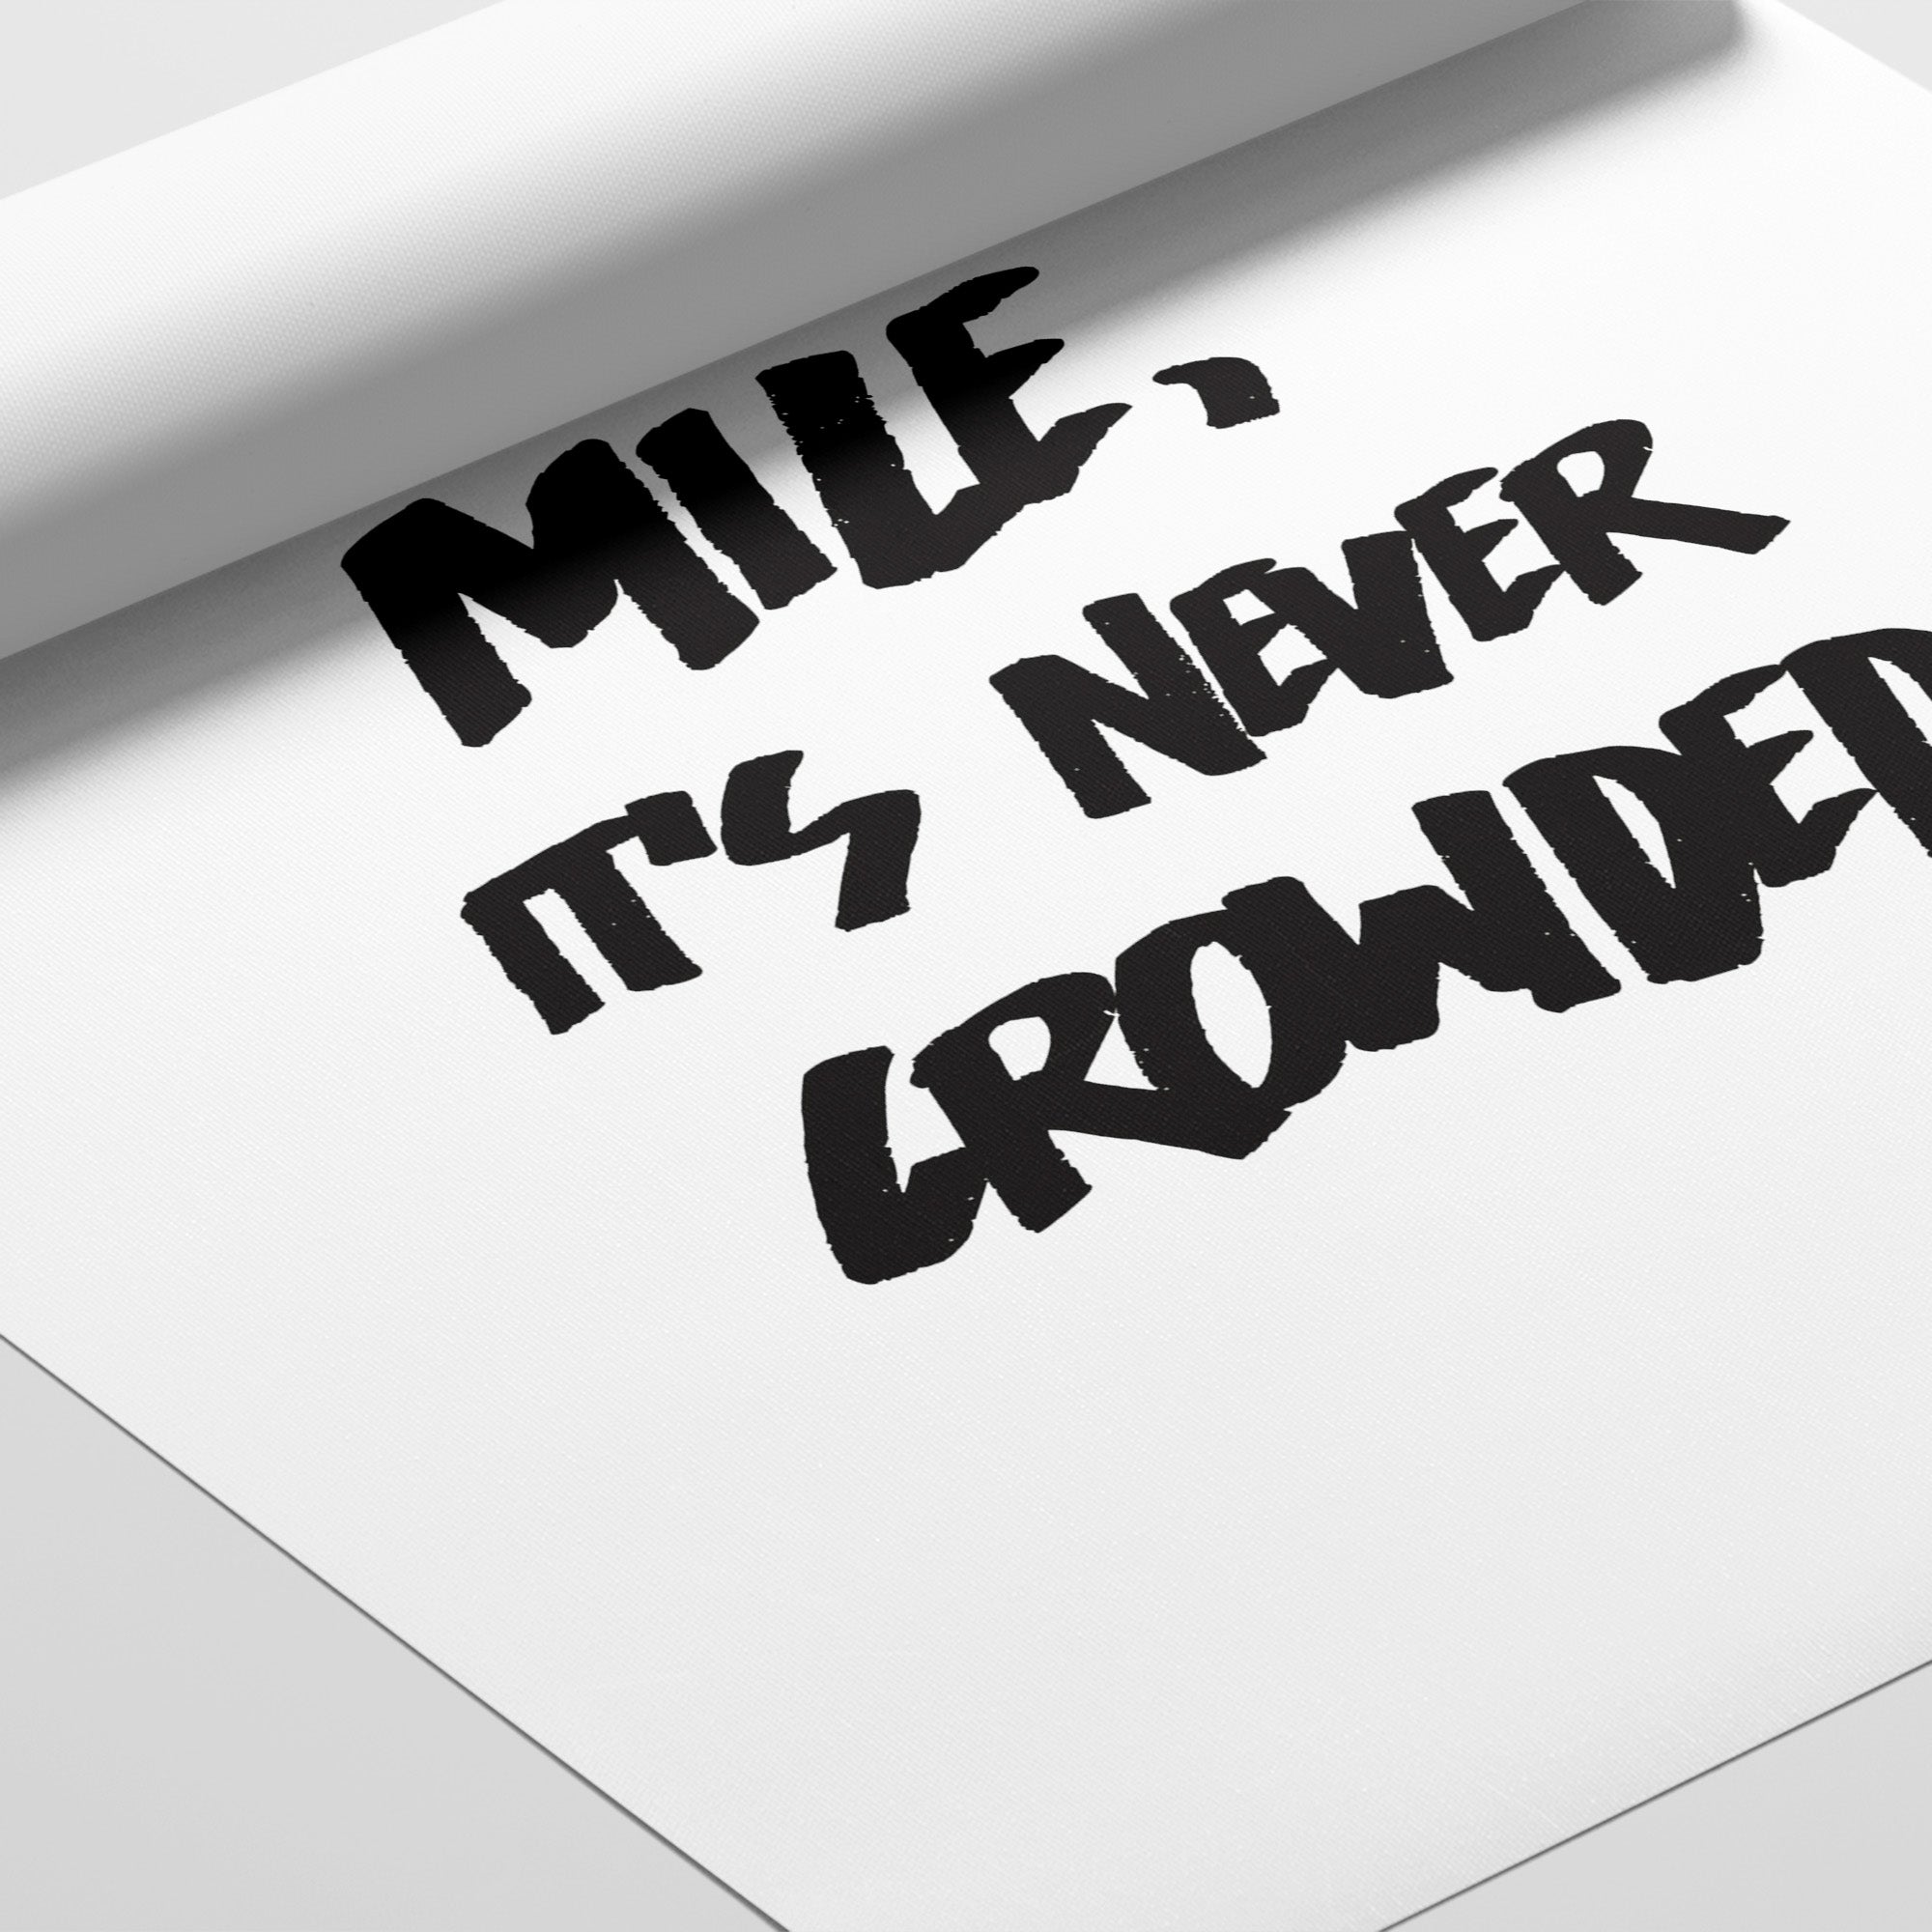 The Extra Mile is Never Crowded